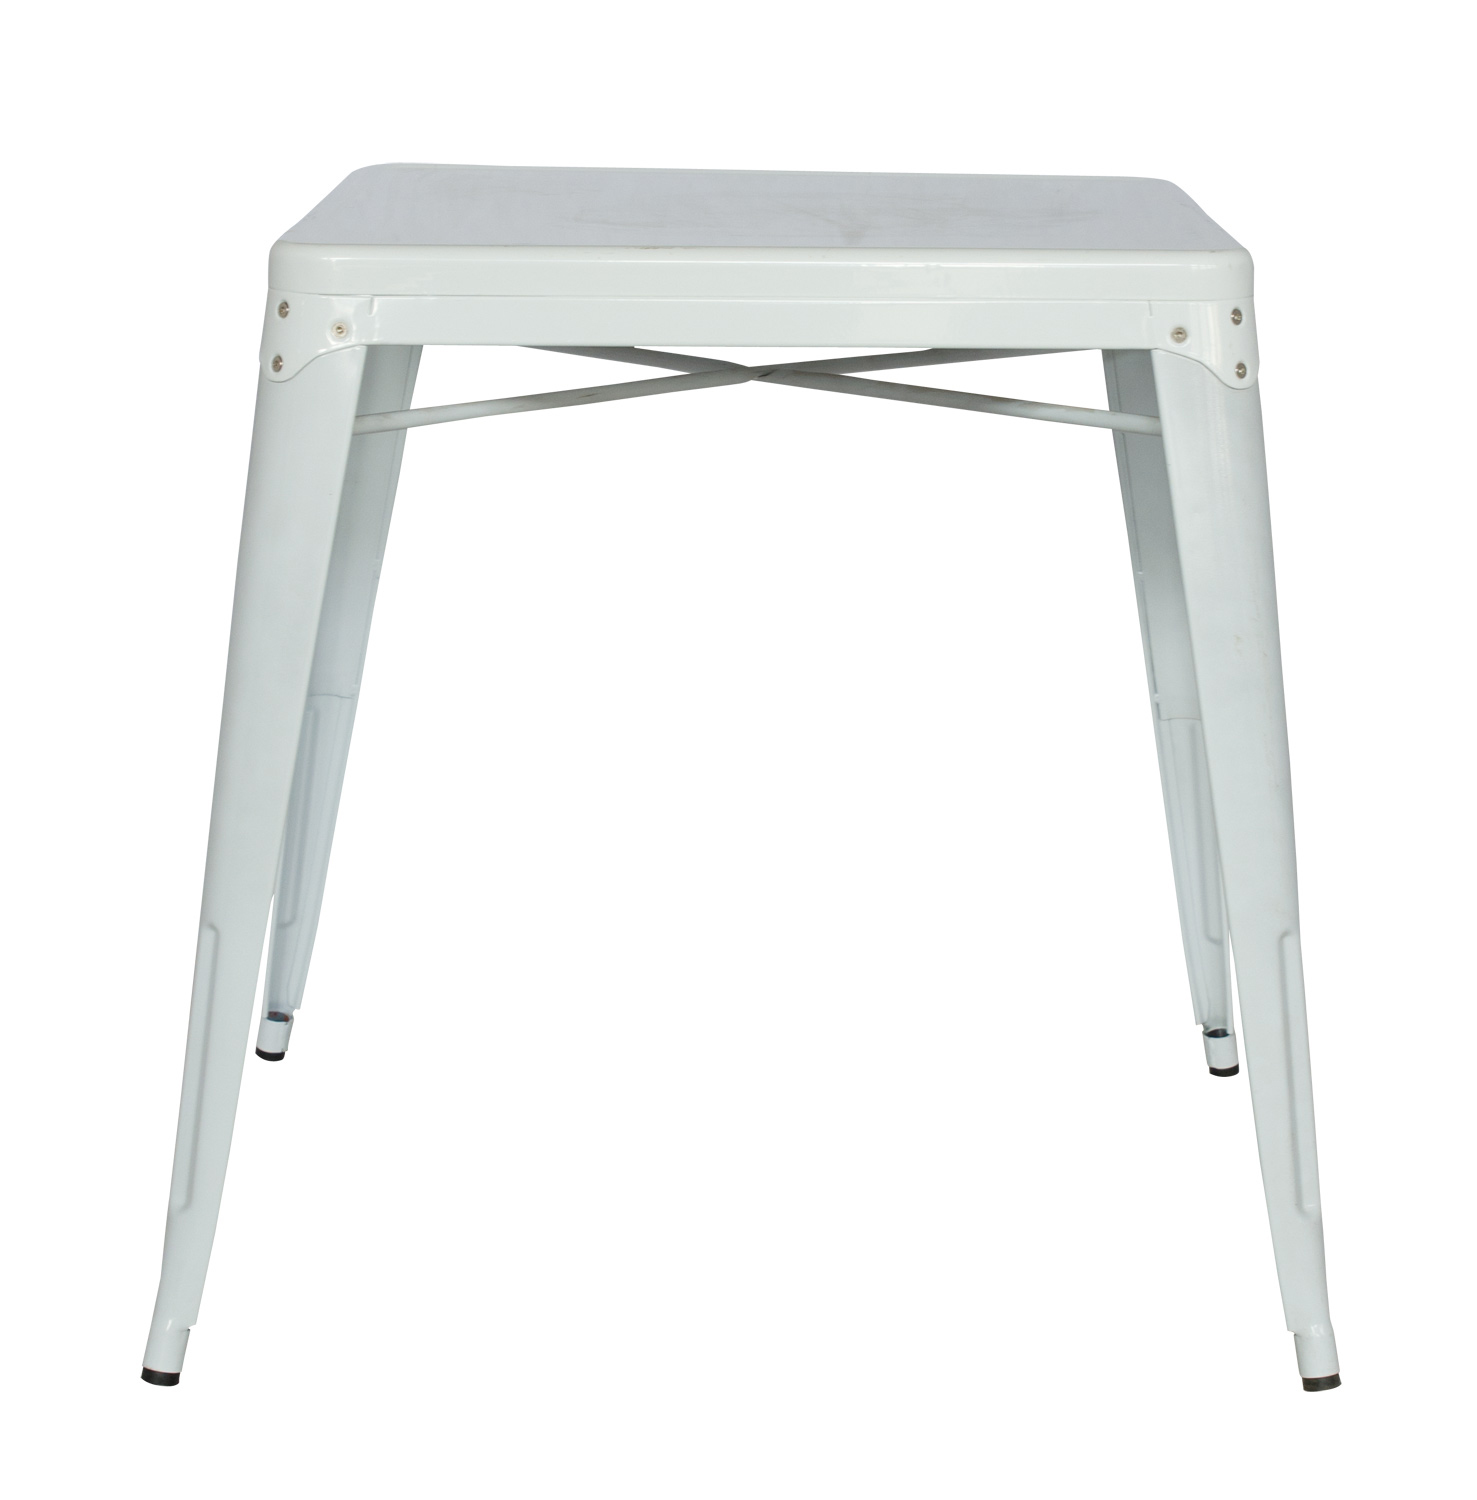 Chintaly Imports 8029 Galvanized Steel Dining Table - White